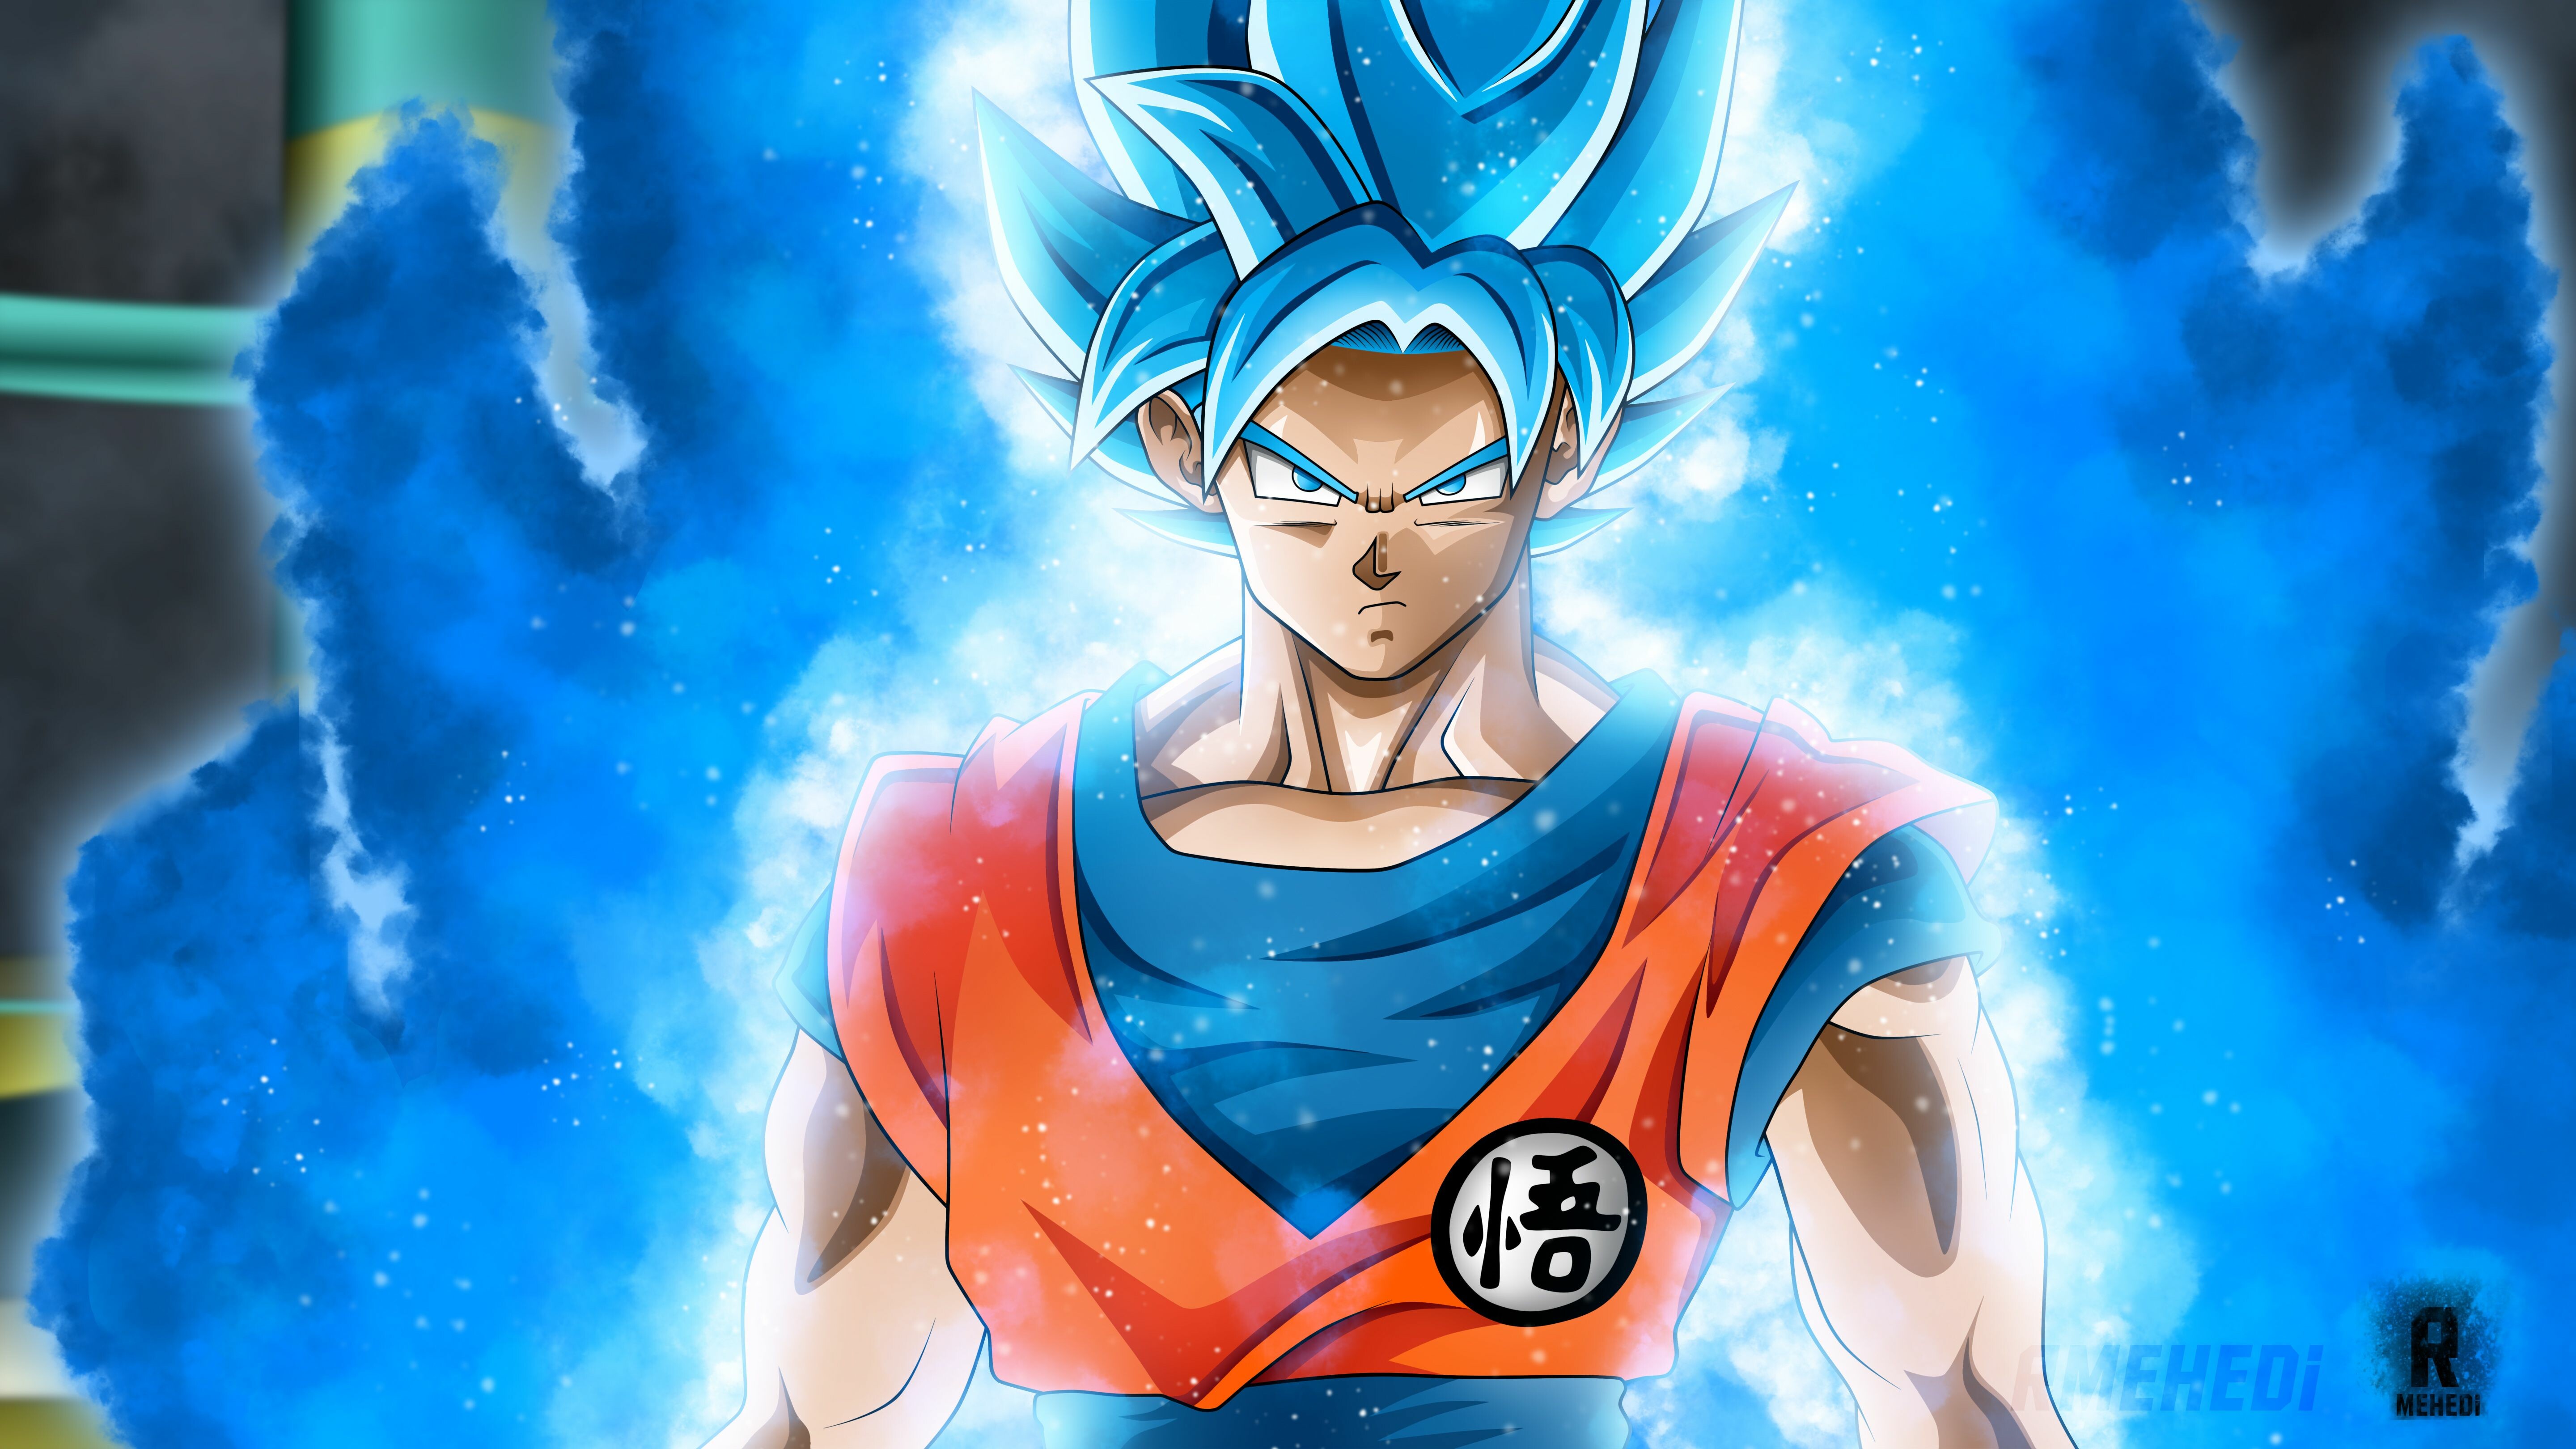 Dragon Ball Goku Wallpaper: HD, 4K, 5K for PC and Mobile. Download free image for iPhone, Android